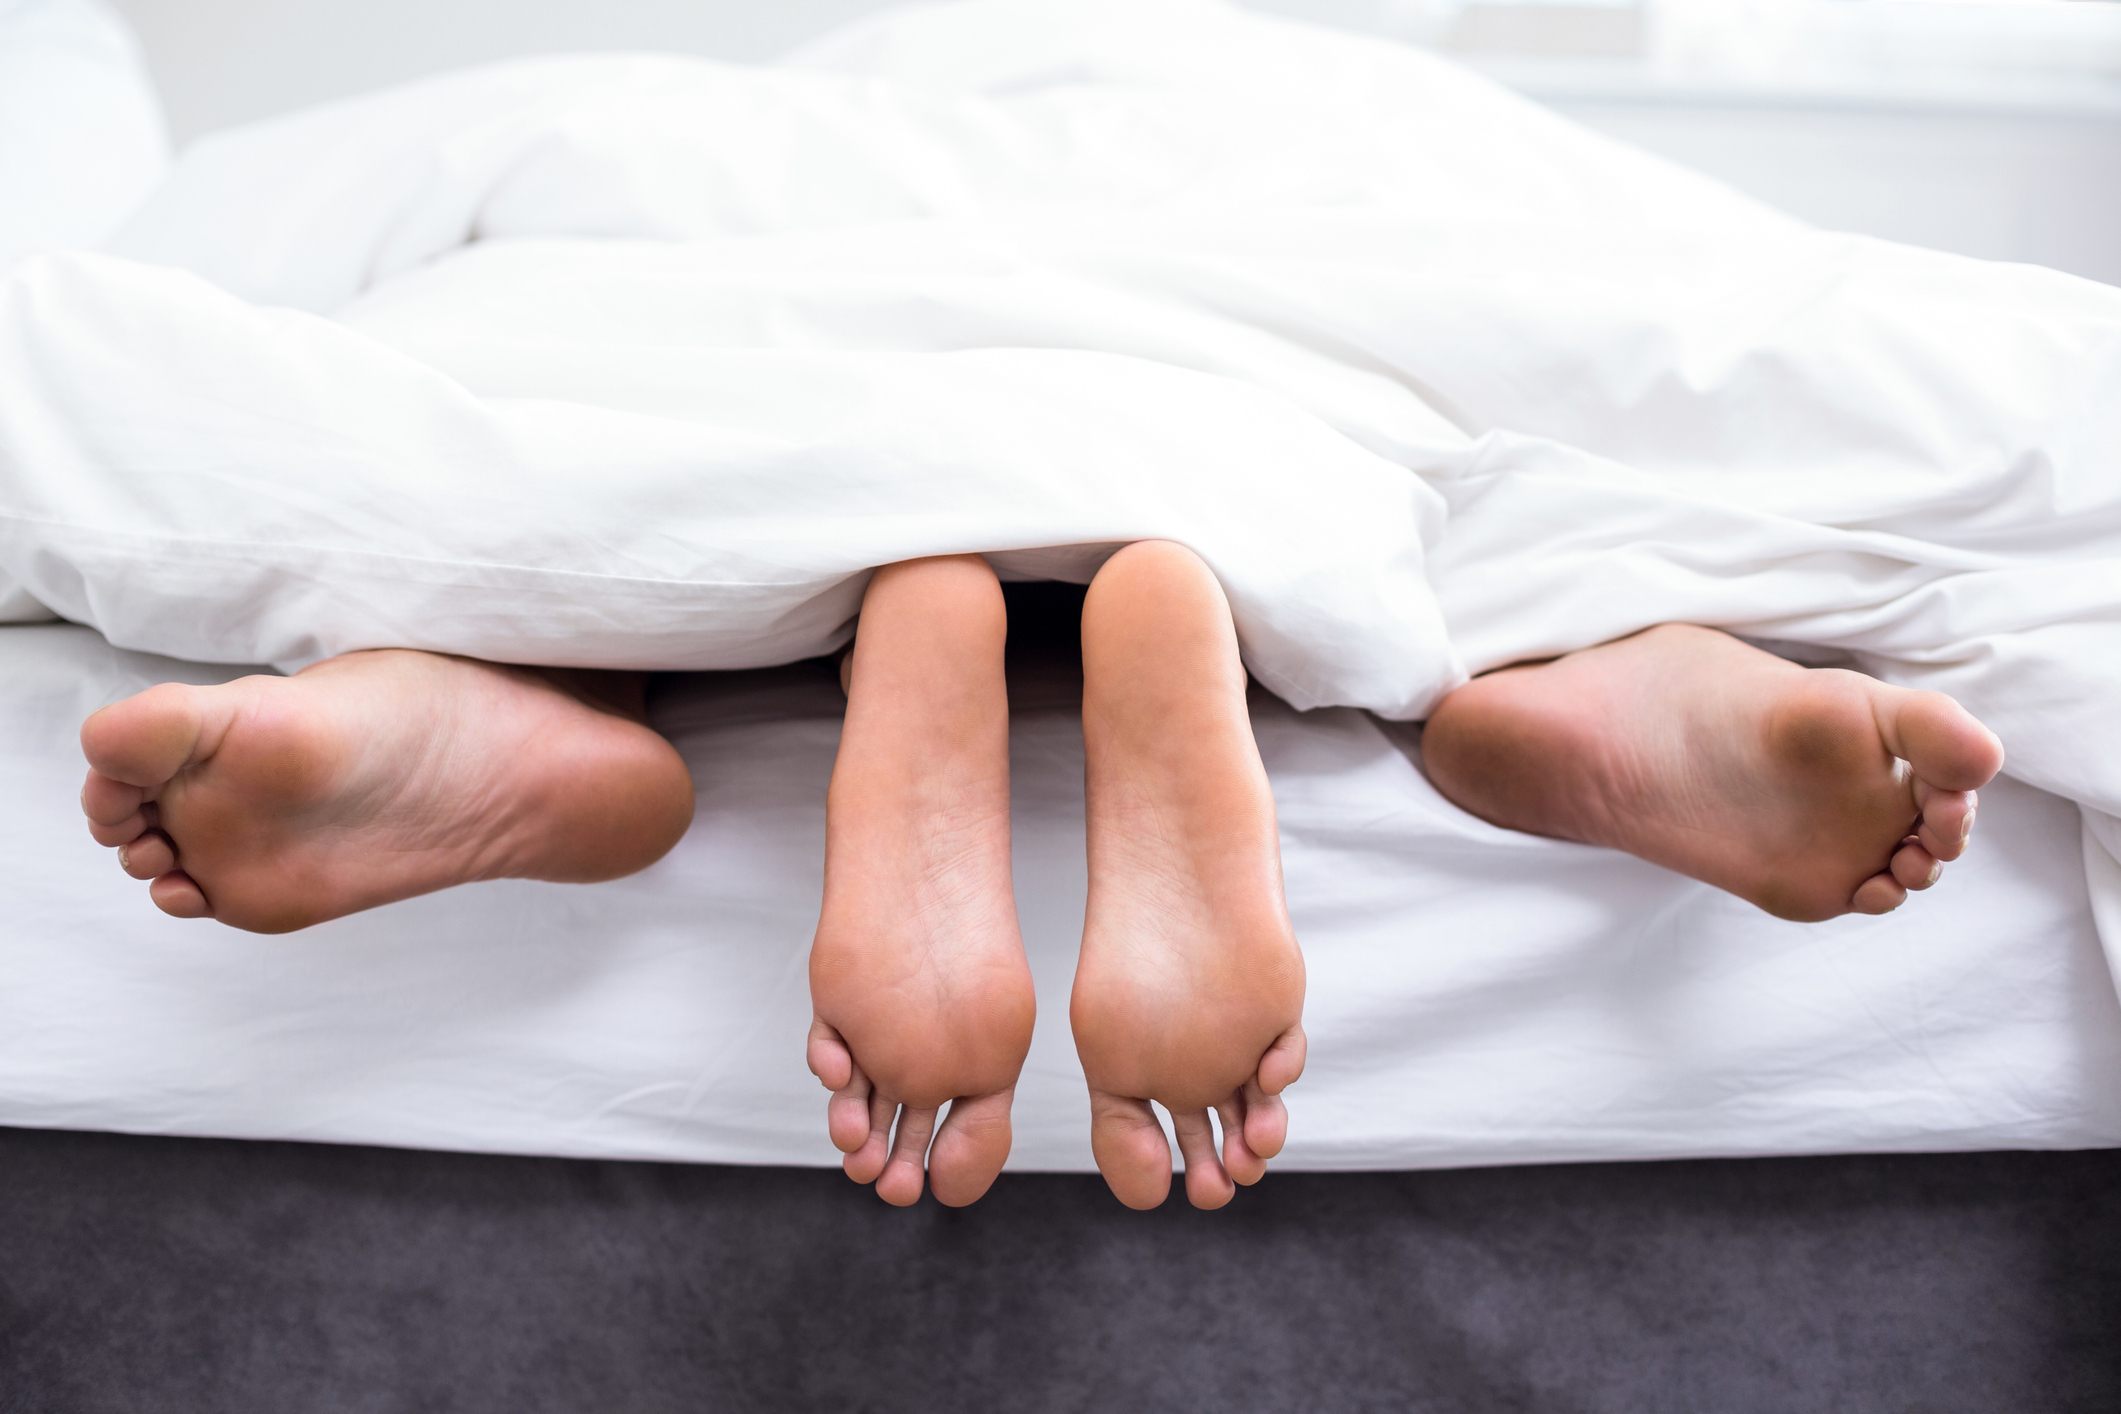 Two pairs of feet peeking out from the covers on a bed